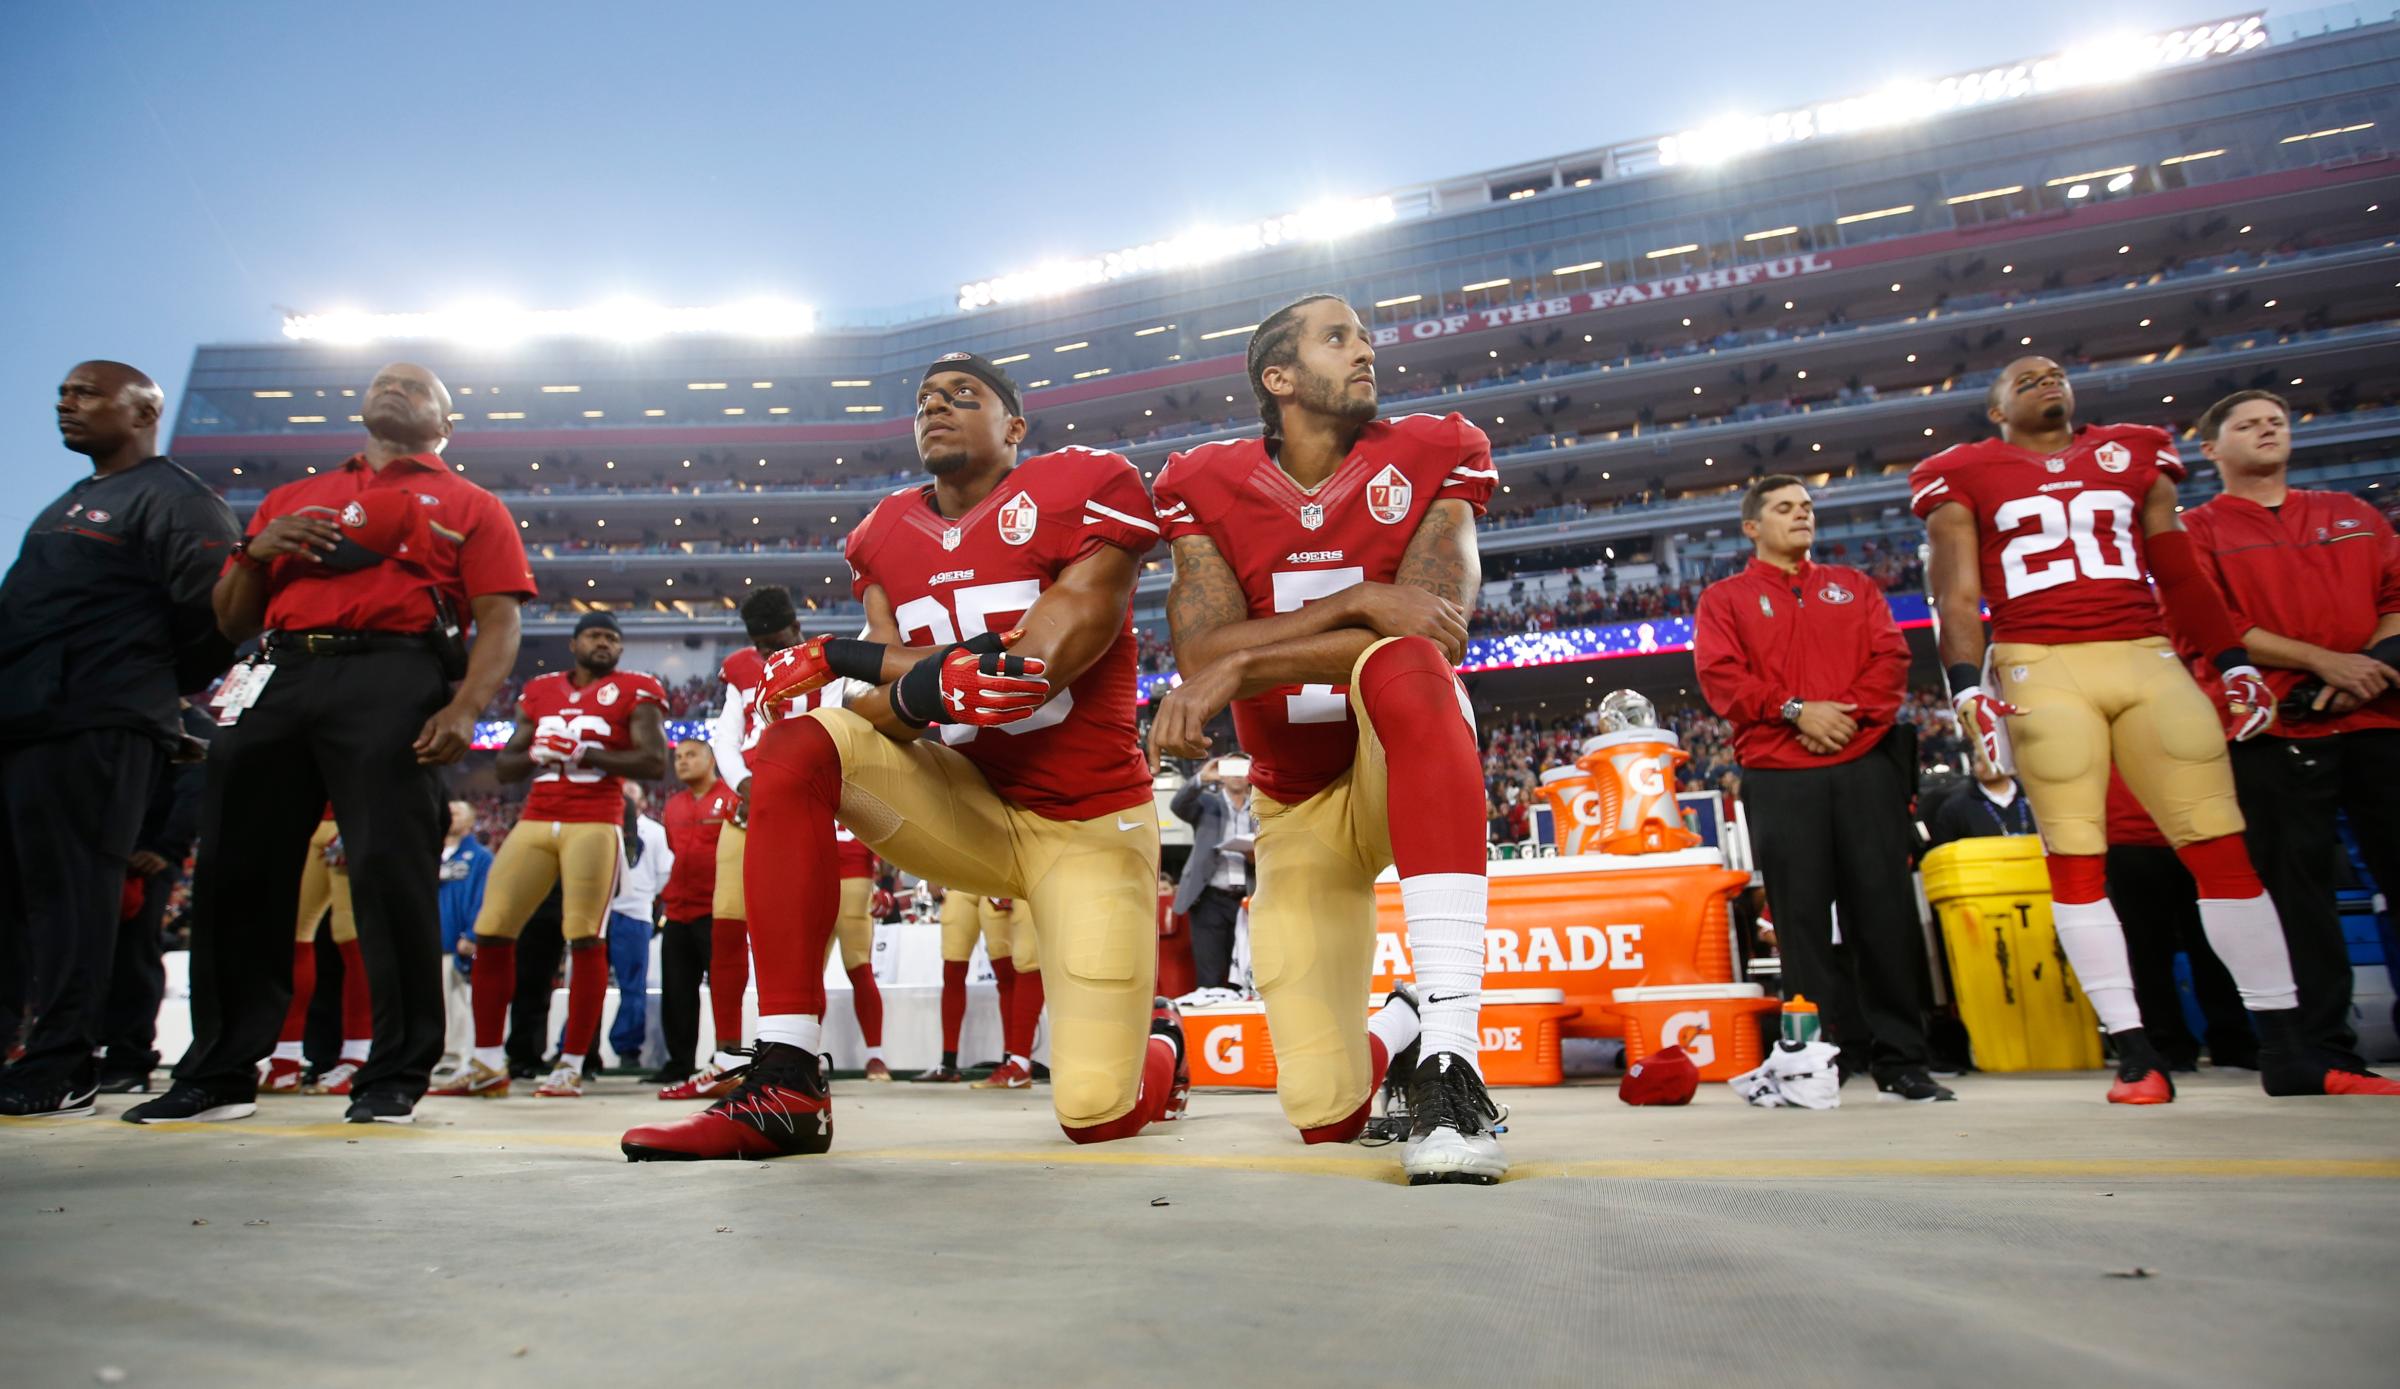 Eric Reid #35 and Colin Kaepernick #7 of the San Francisco 49ers kneel during the anthem, prior to the game against the Los Angeles Rams at Levi Stadium in Santa Clara, Calif., on Sept. 12, 2016.